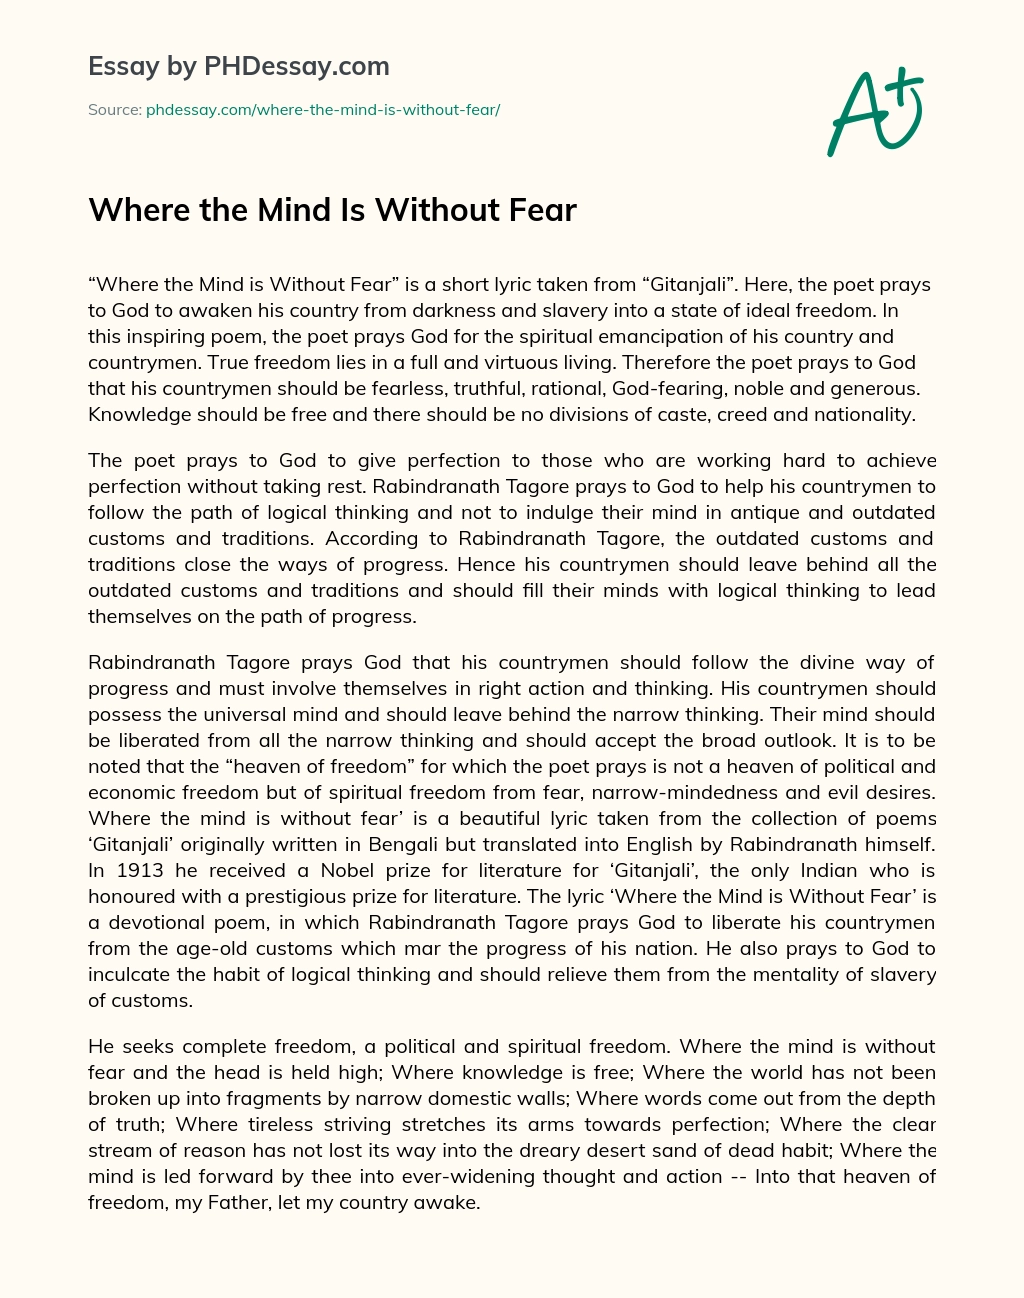 Where the Mind Is Without Fear essay